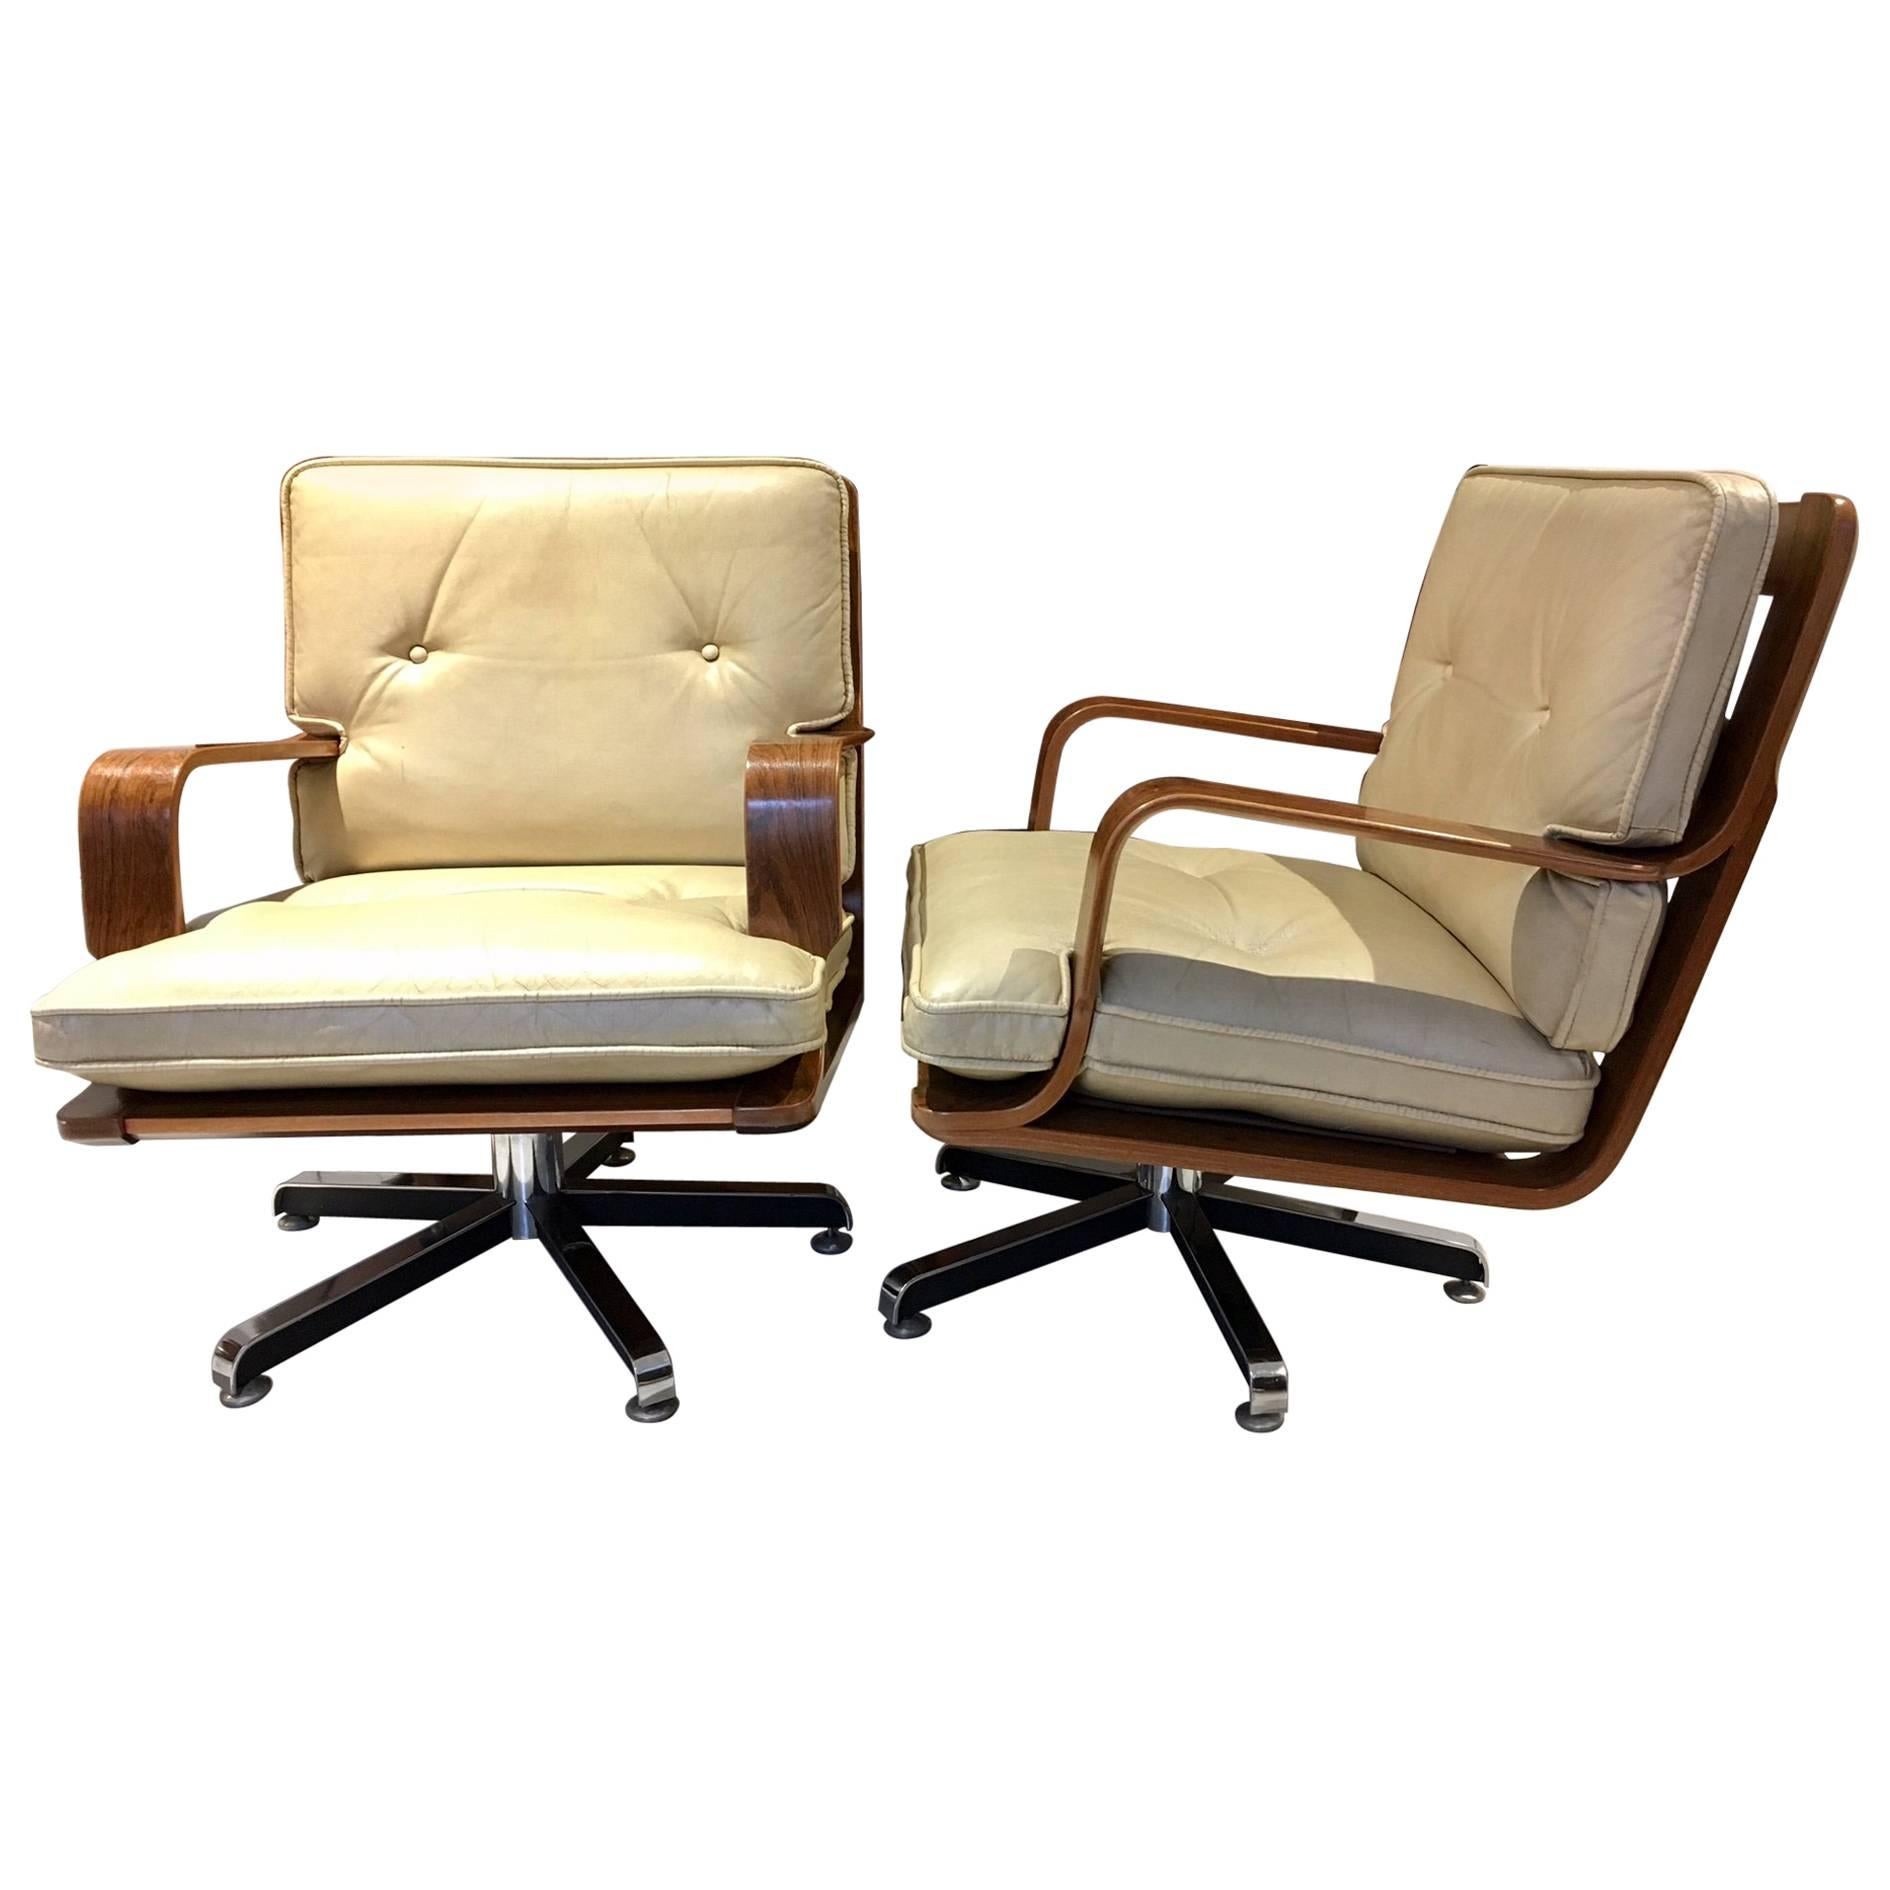 Pair of Cream-Colored Leather Swivel Armchairs with Wooden Frame